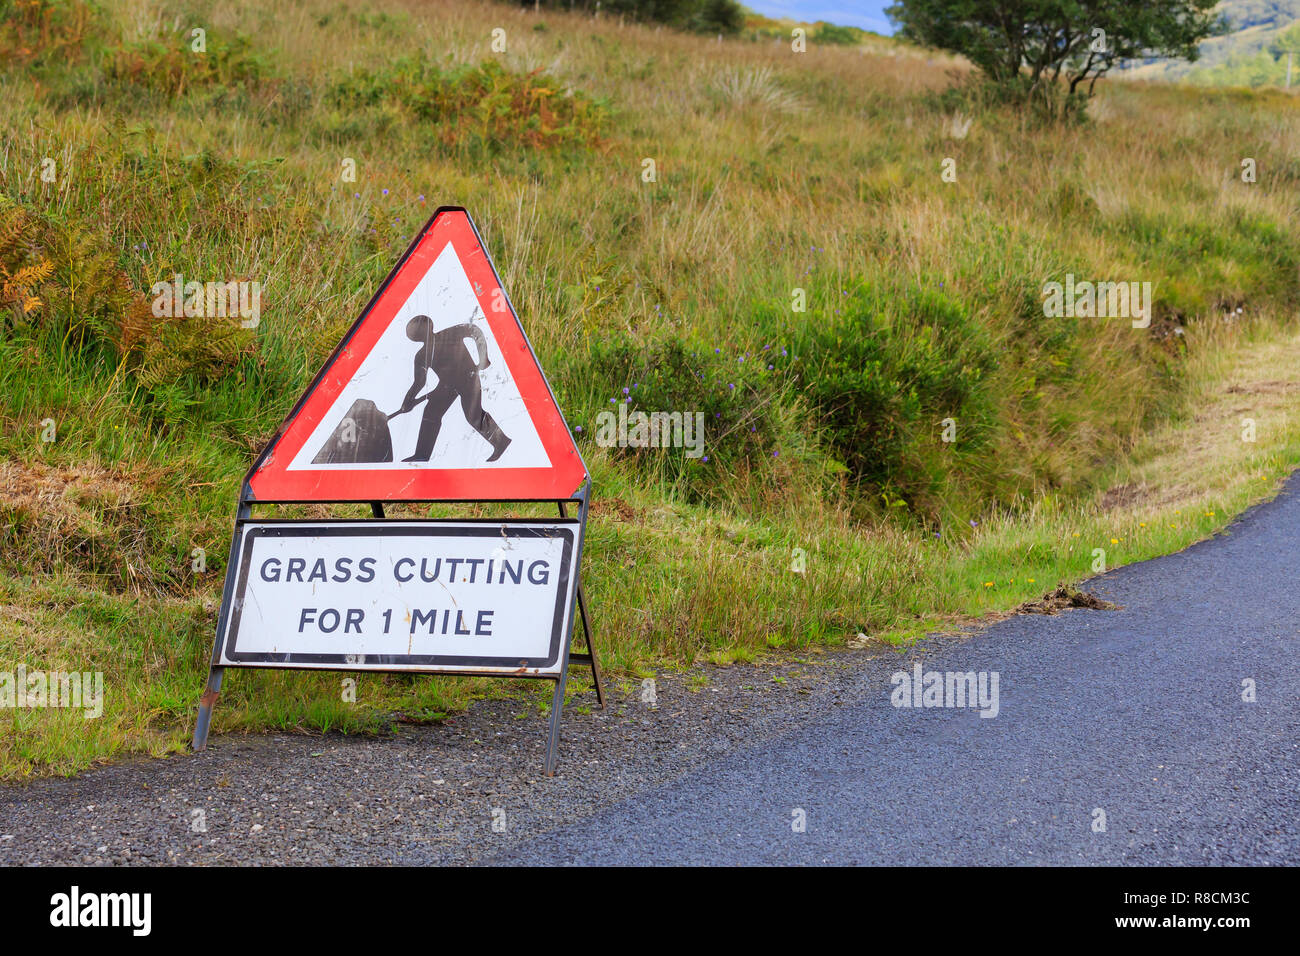 UK Triangle road sign warning of grass cutting for one mile Stock Photo